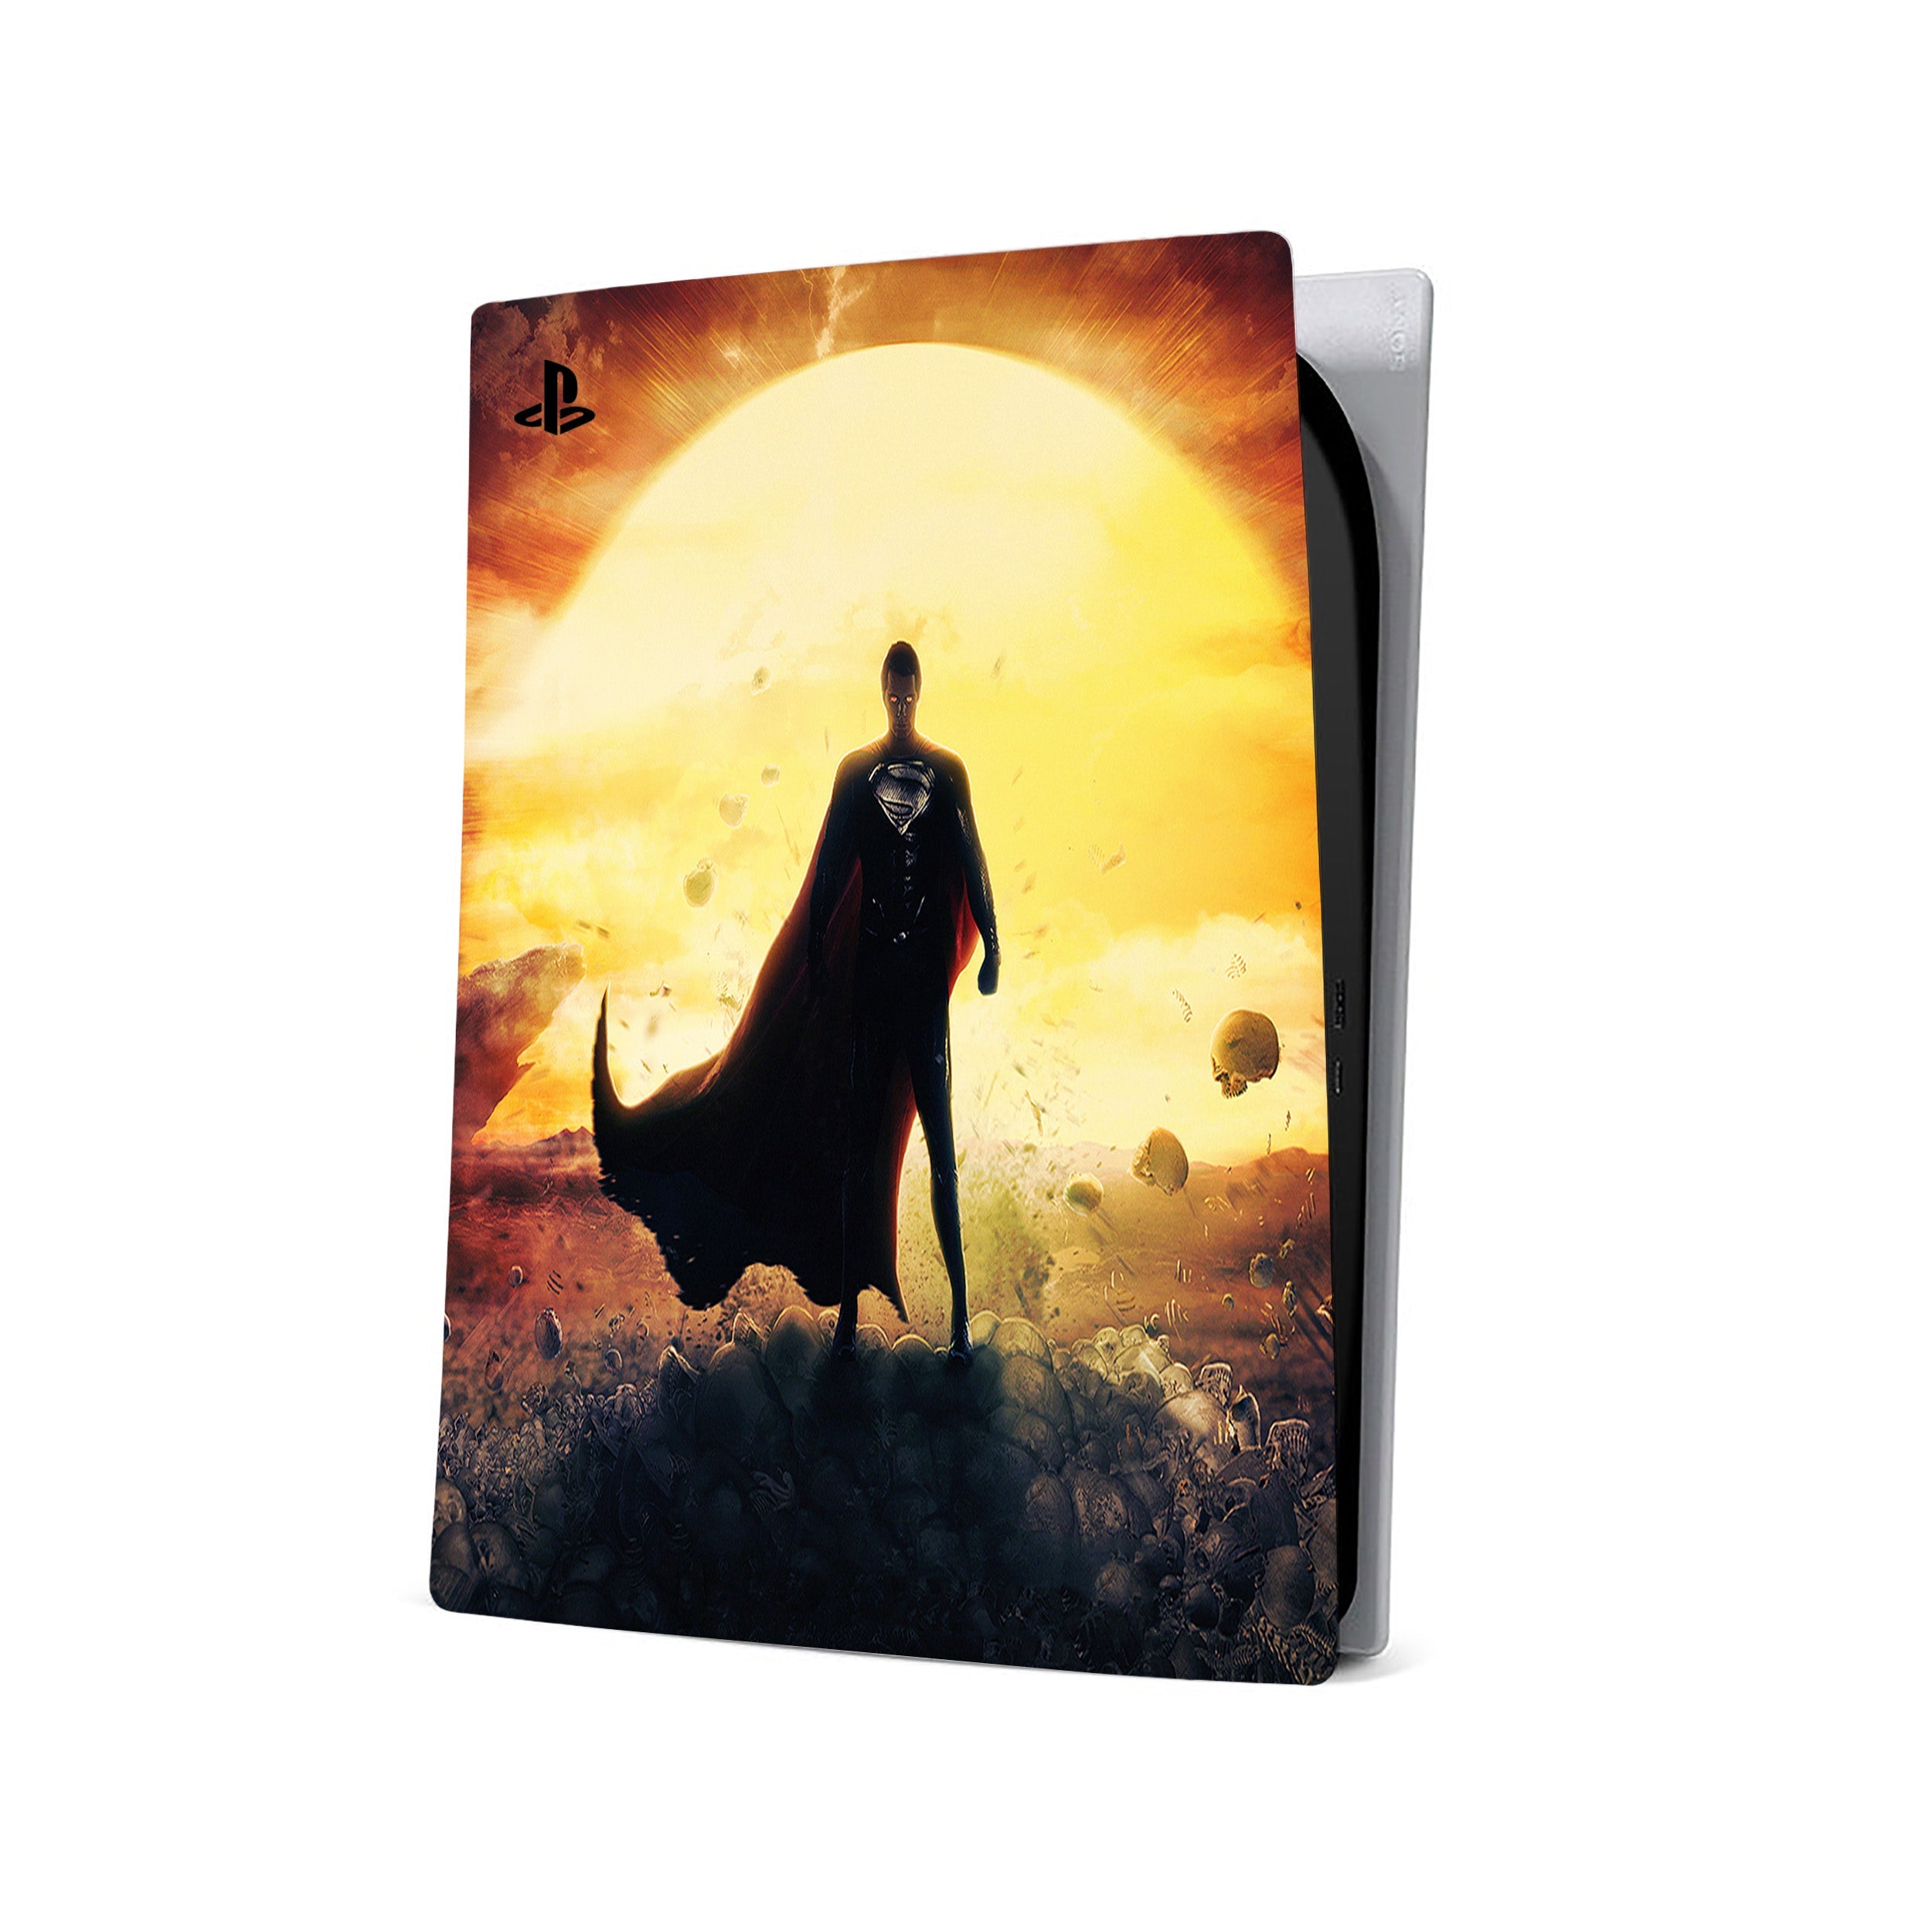 A video game skin featuring a DC Comics Superman design for the PS5.